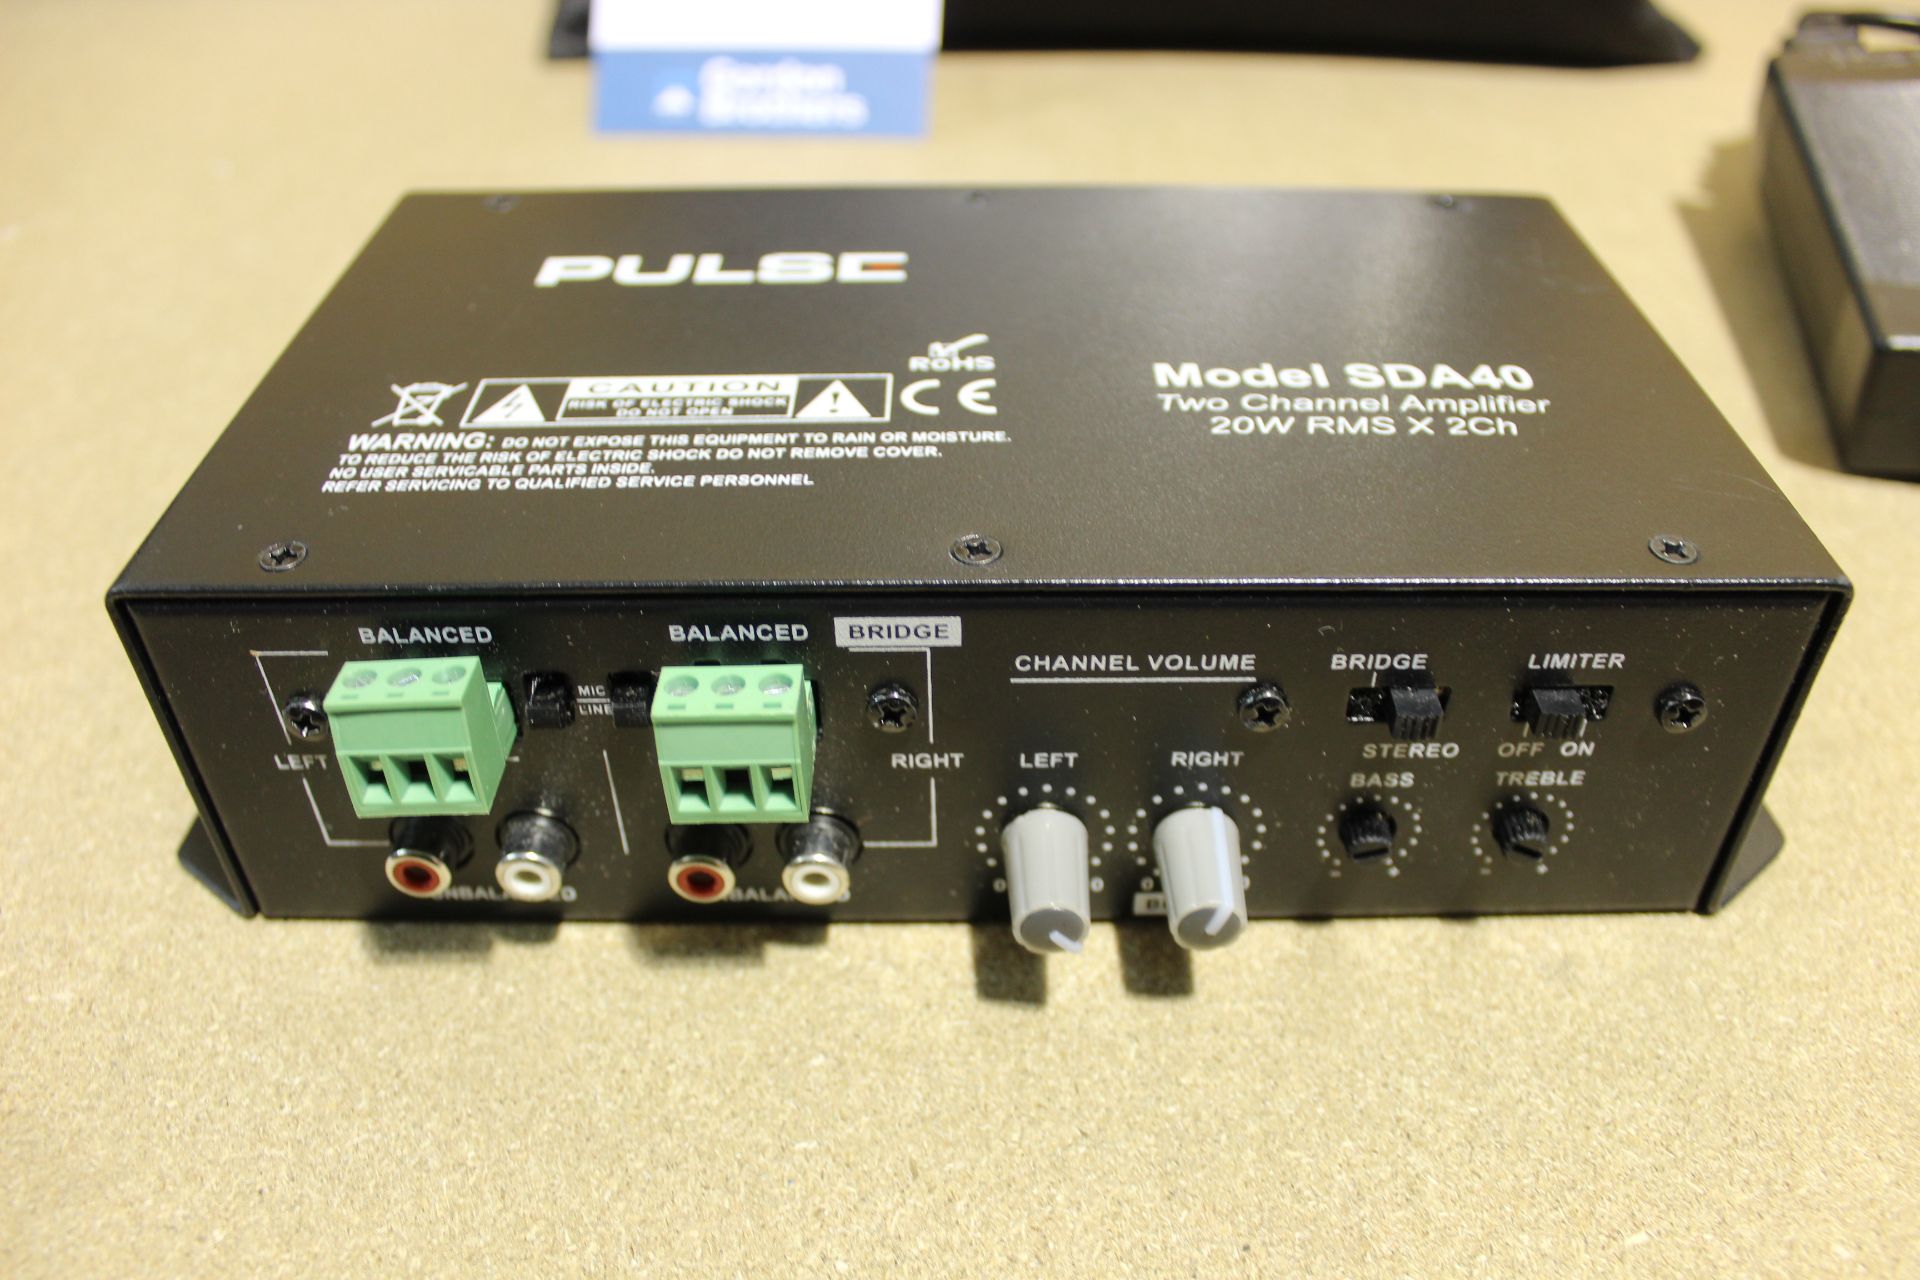 Pulse Compact SDA40 20W RMS x 2 channel stereo amplifier with 1x PSU (Purchased in 2014 - 2018 - Image 2 of 4